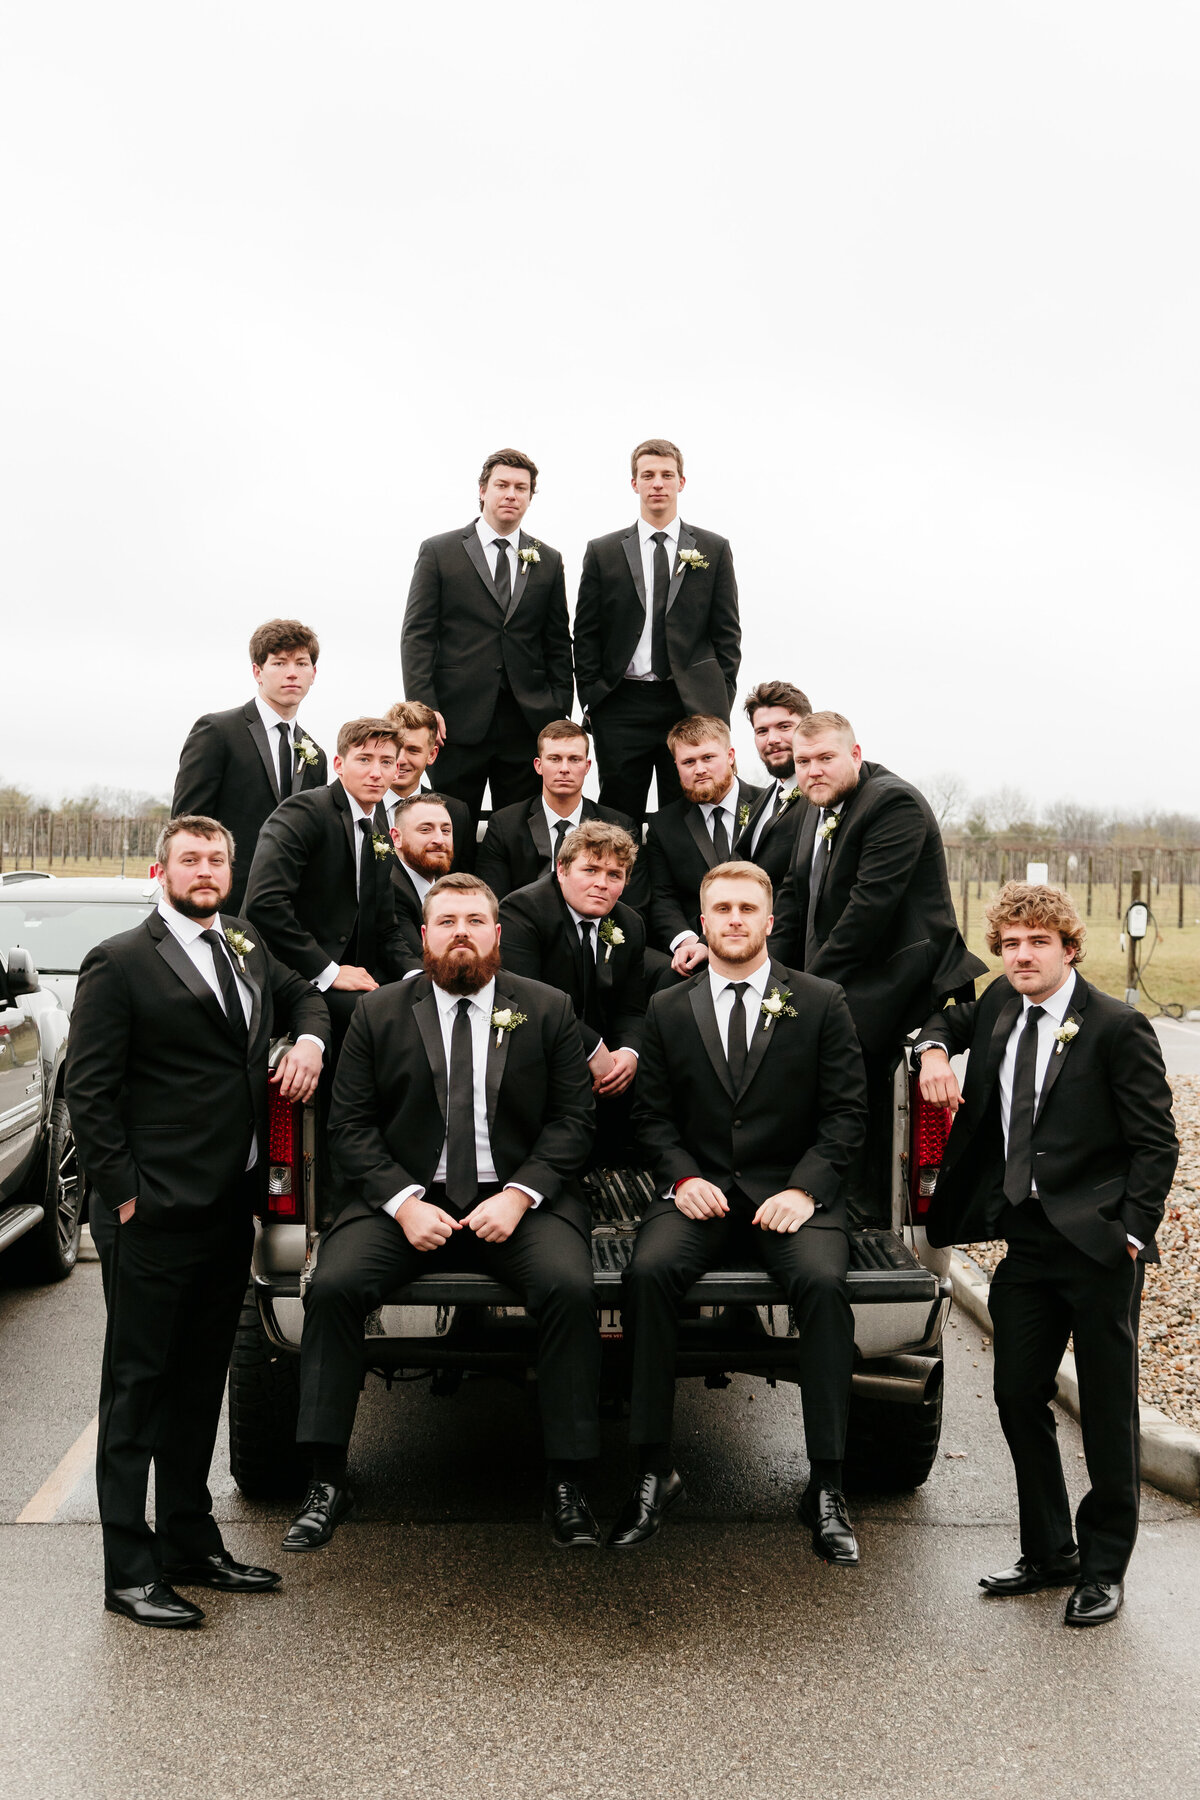 Groomsmen on Truck waiting for Cerenony